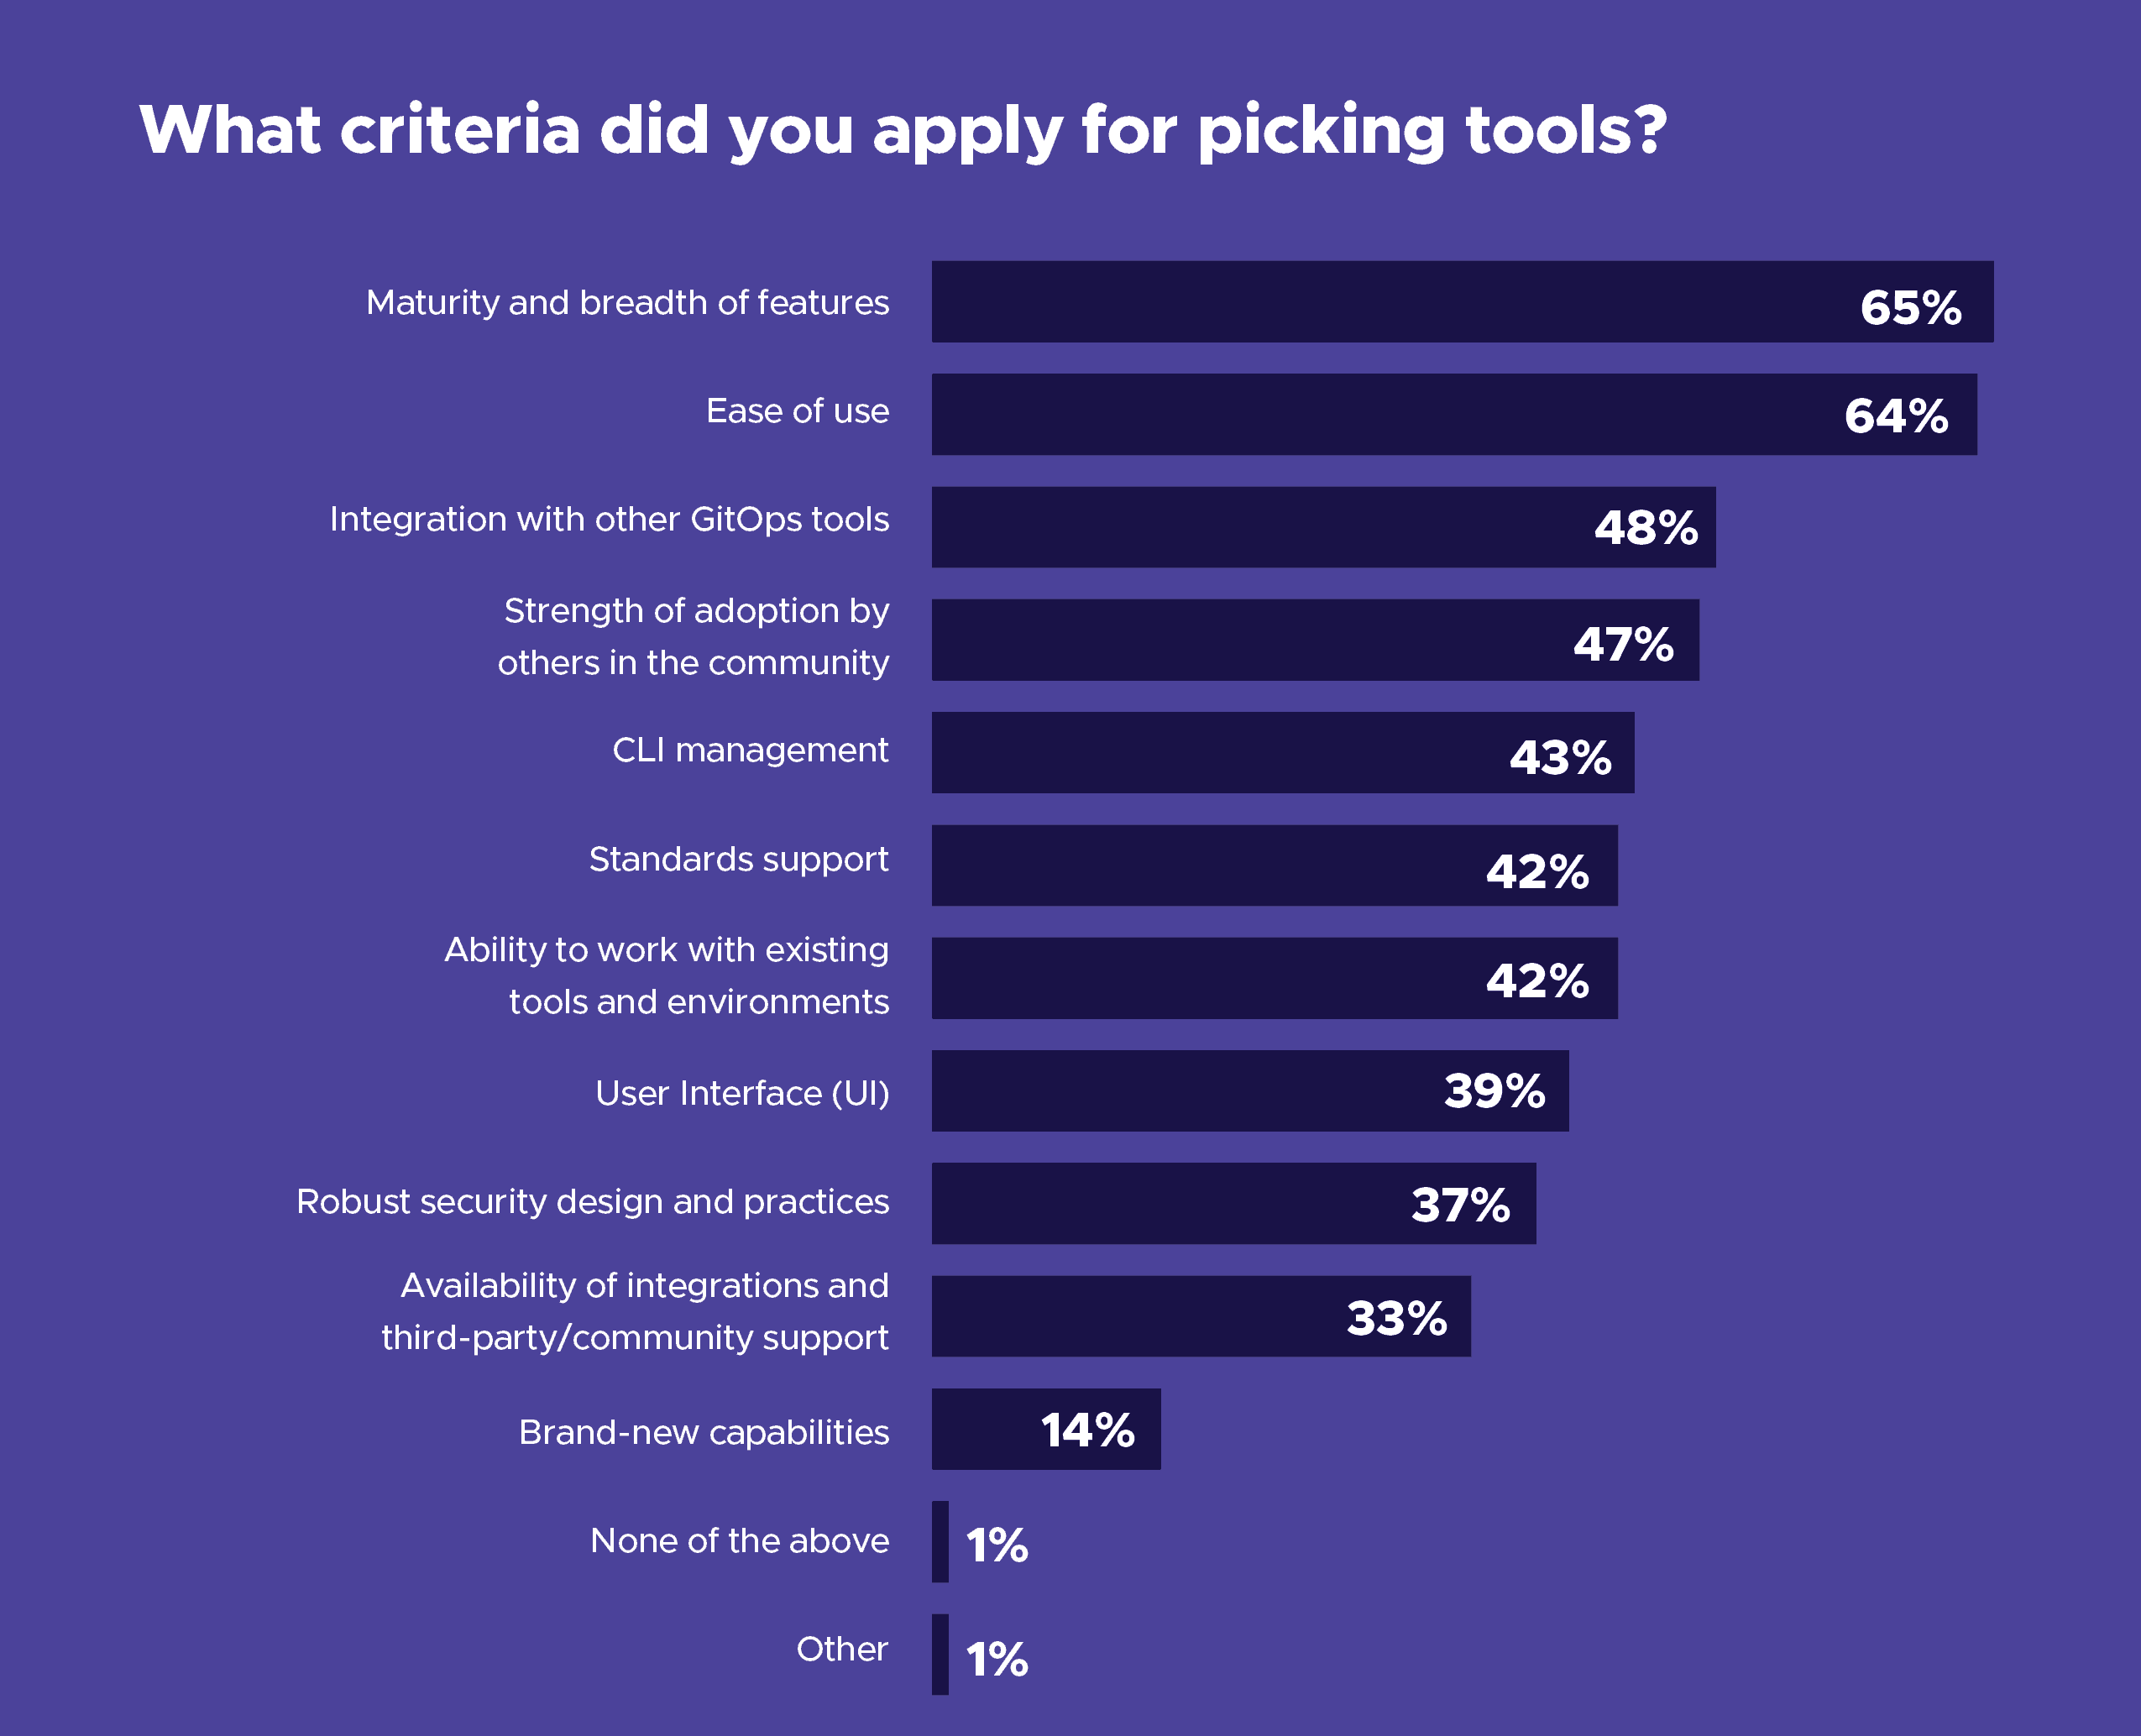 Bar chart showing respondent's respond towards question "What criteria did you apply for picking tools?" 65% chose "maturity and breadth of features", 64% chose "ease of use "while 14% chose "brand-new capabilities"